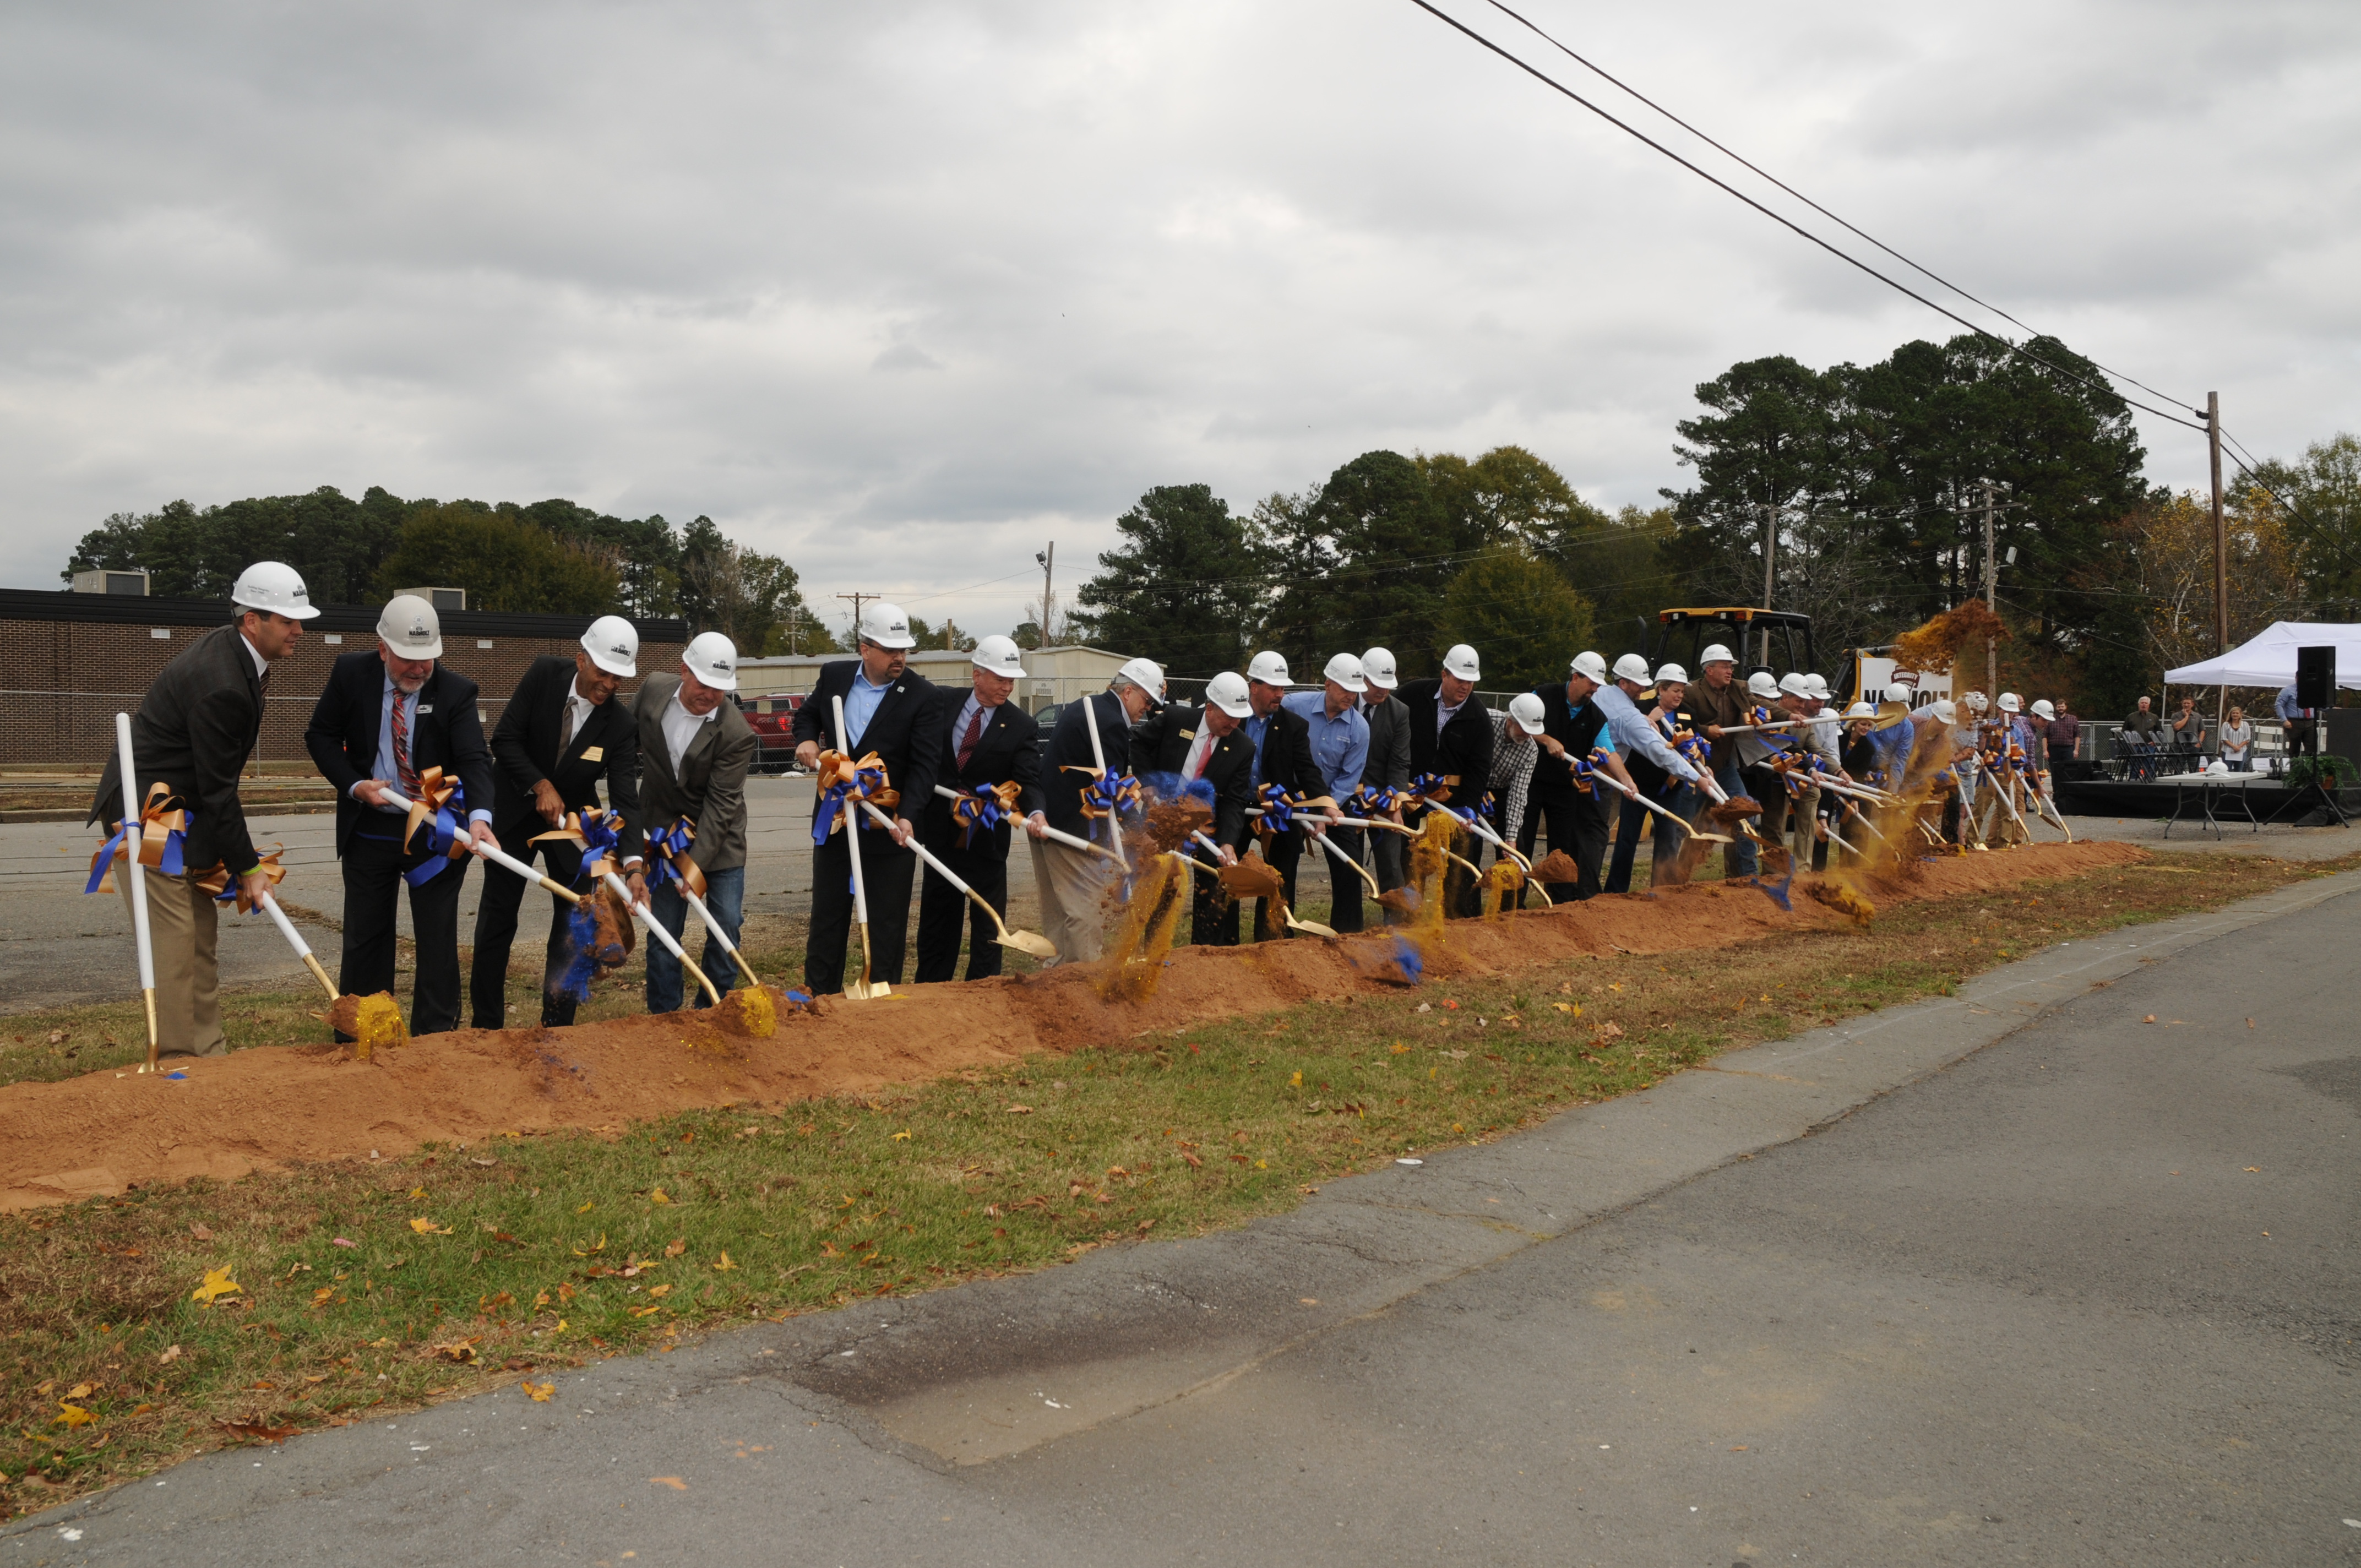 A photo of some people with shovels celebrating the commencement of construction.